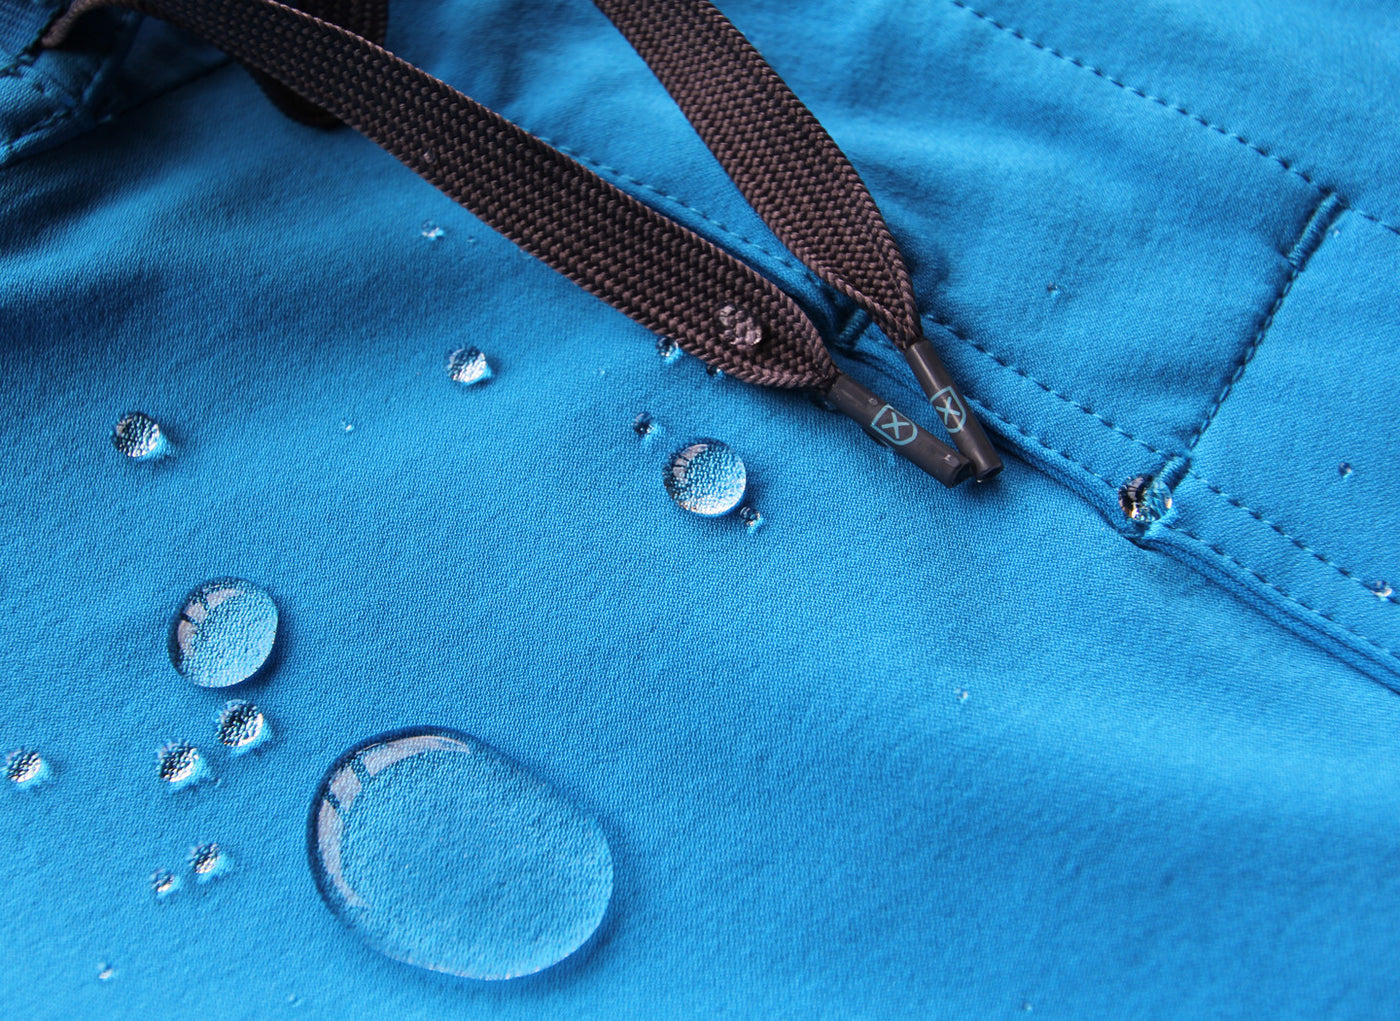  The Spartan Board Shorts - Hydrophobic (Water Repellent) Fabric with NanoSphere | by BLUESMITHS